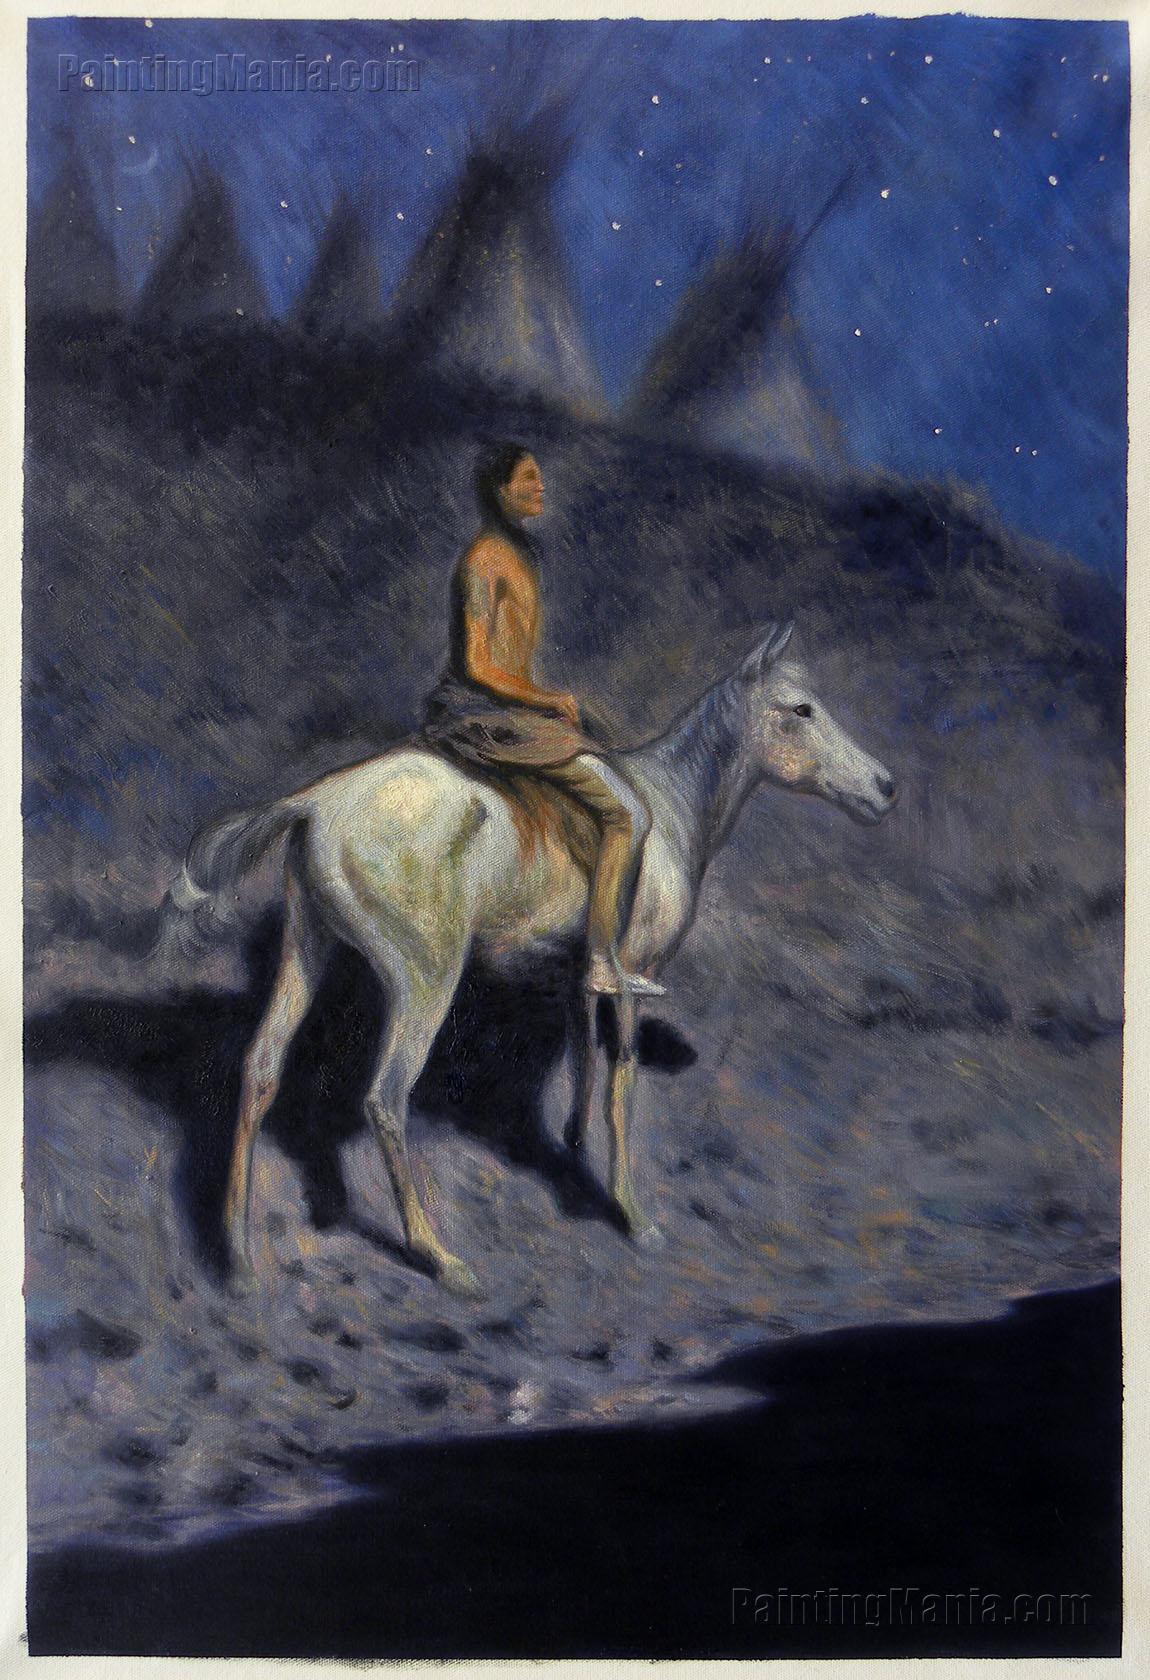 Indian in the Moonlight